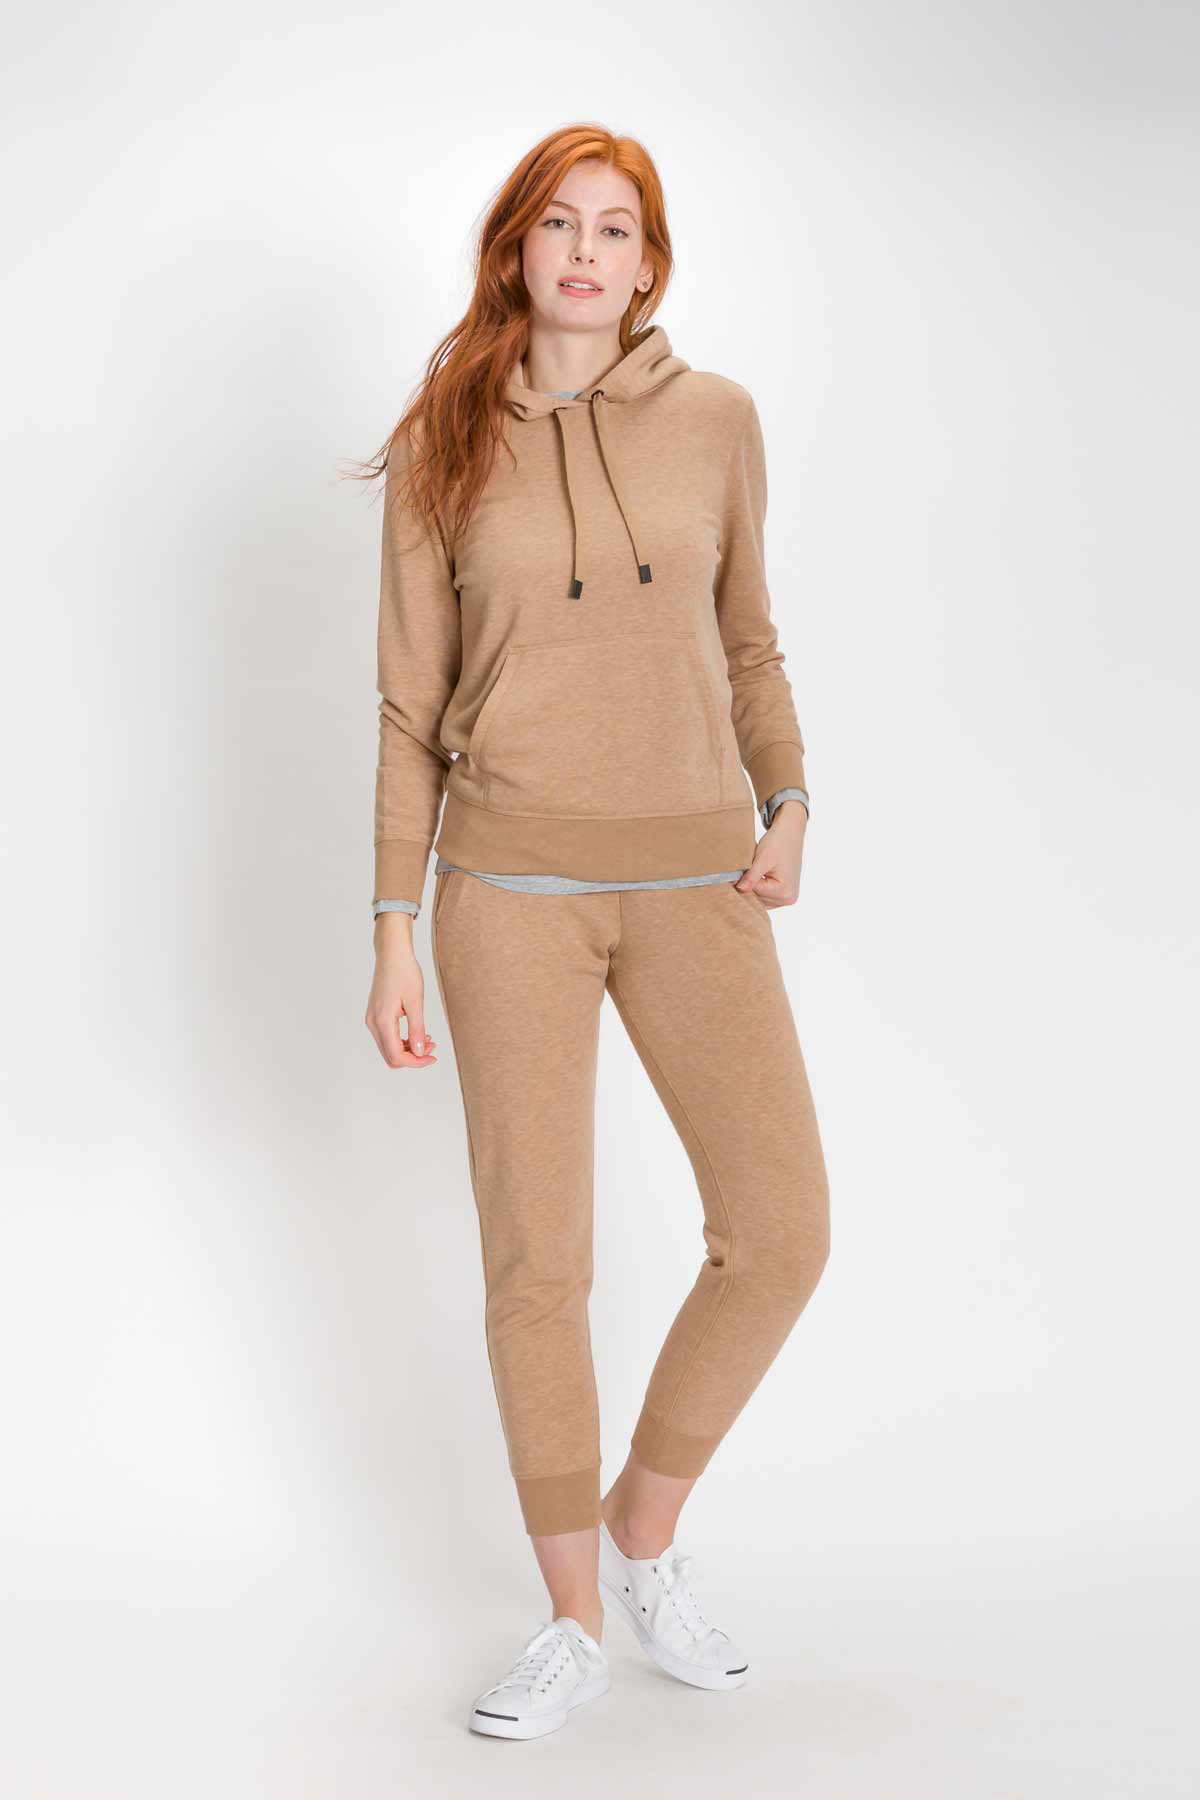 Sweatshirt and Sweatpants - Women's Classic Hoodie and Sweatpants in Camel on model full body